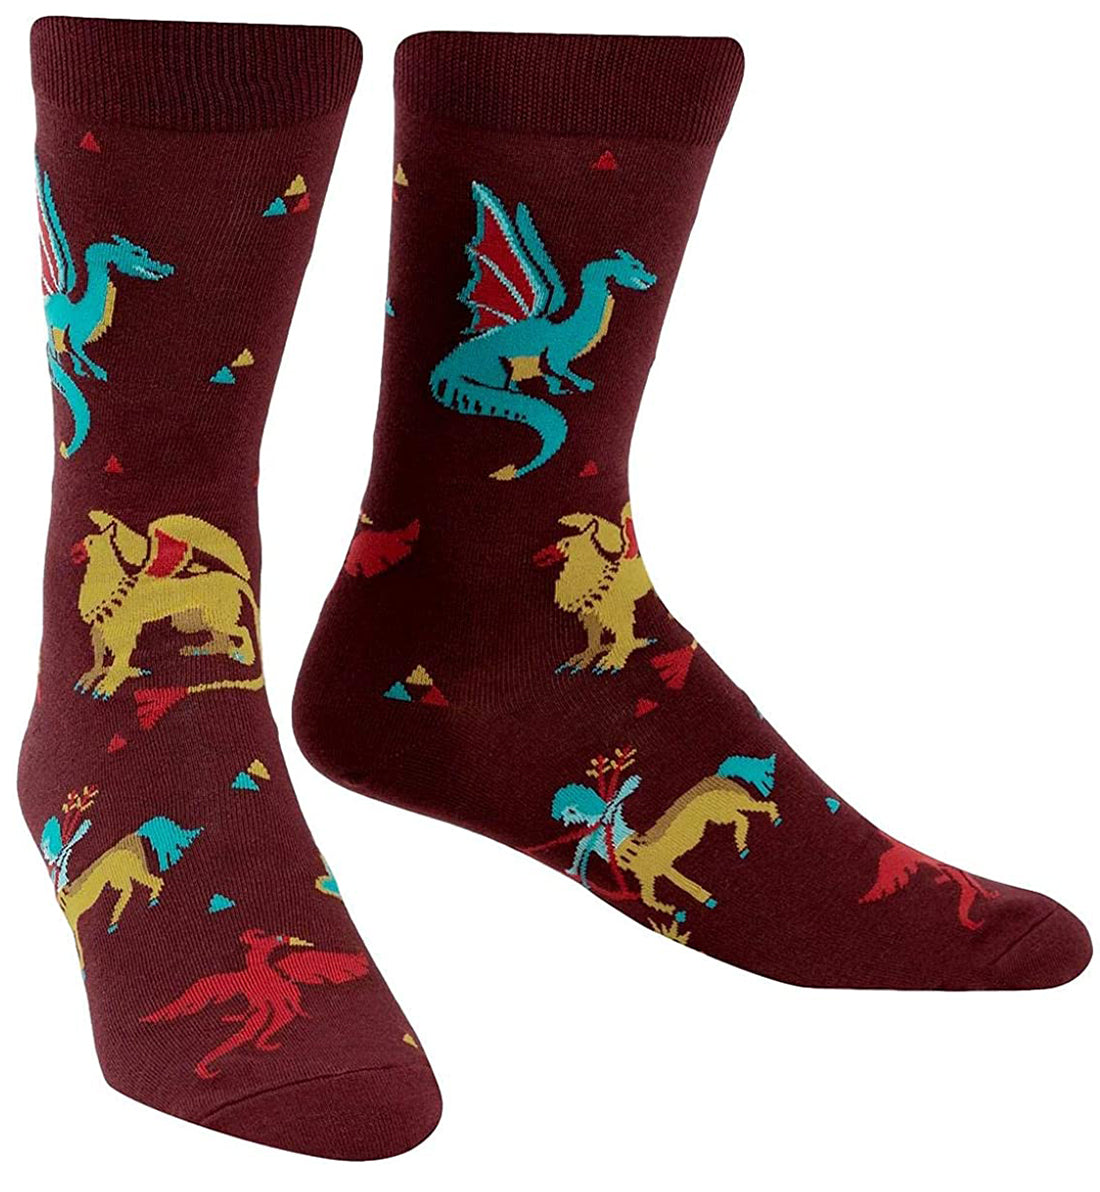 SOCK it to me Men&#39;s Crew Socks (MEF0458),Beasts of Yore - Beasts of Yore,One Size